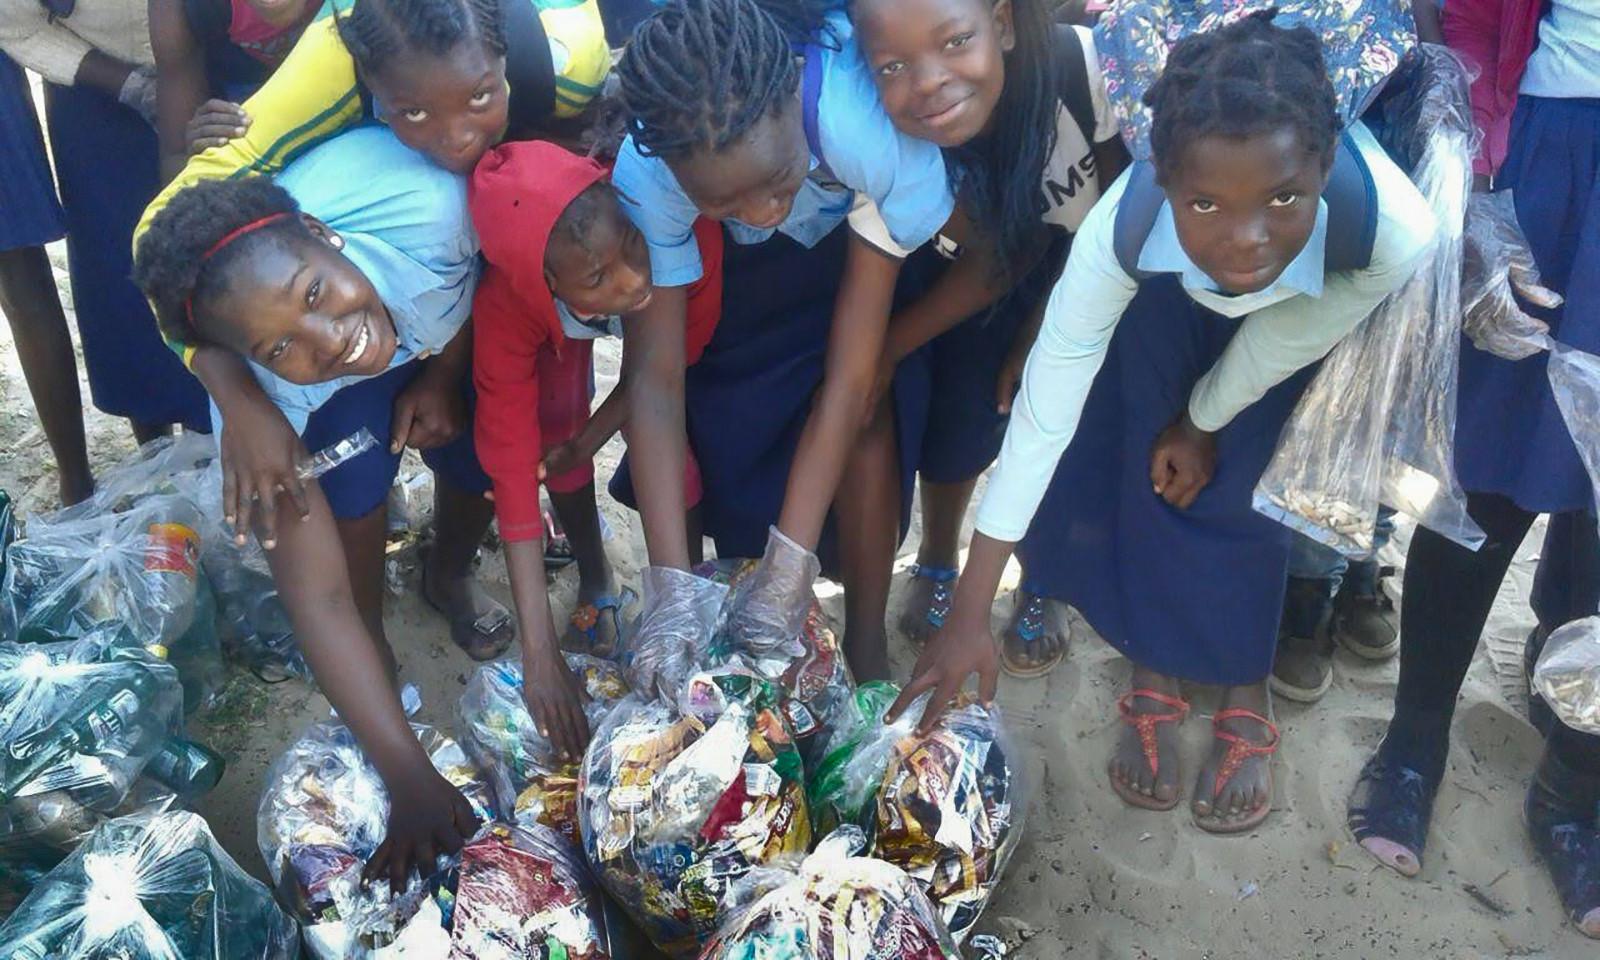 Children looking up into the camera, reaching for plastic bags with litter